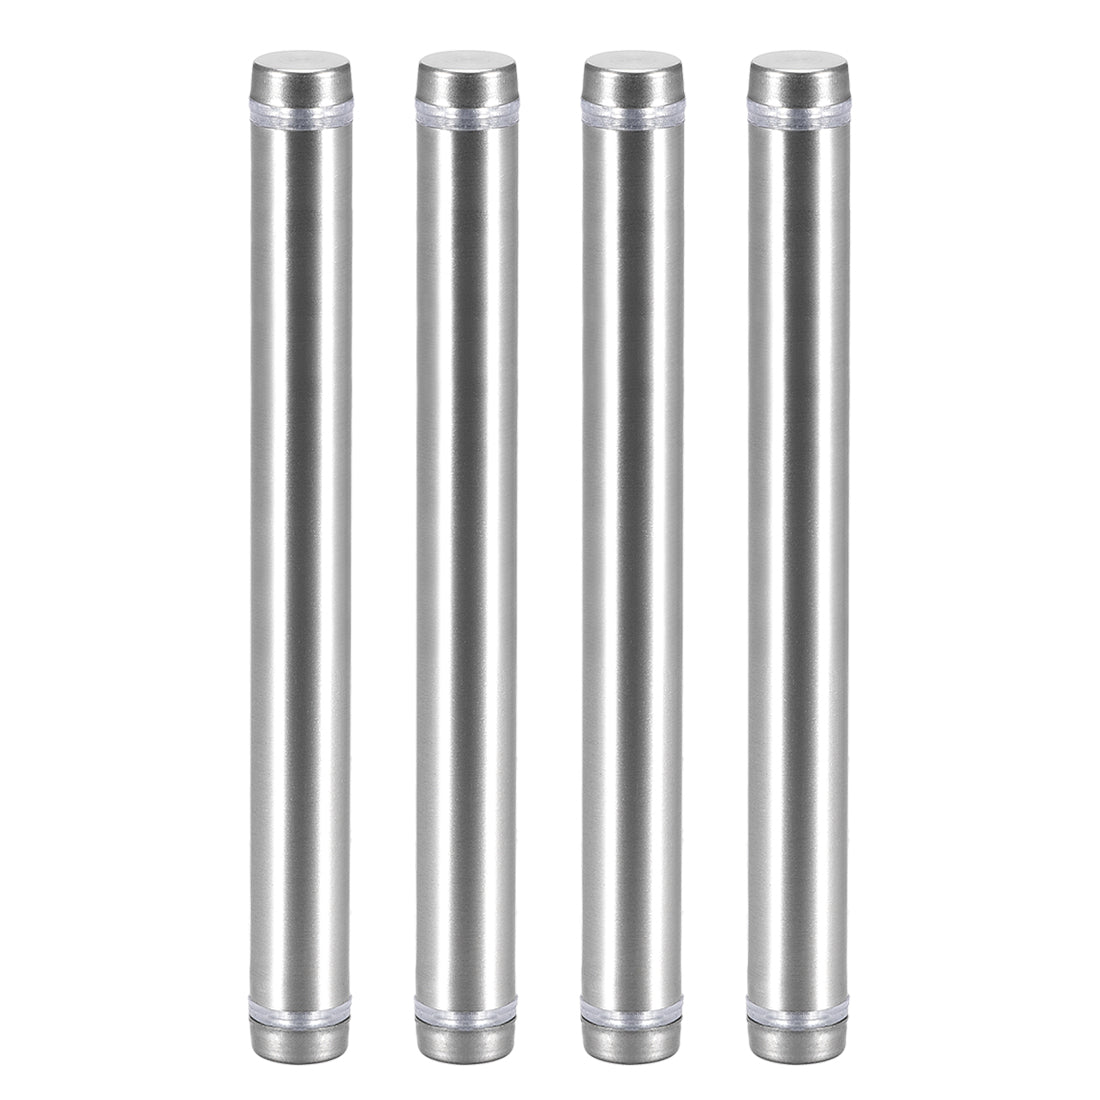 uxcell Uxcell Glass Standoff Double Head Stainless Steel Standoff Holder 12mm x 124mm 4 Pcs